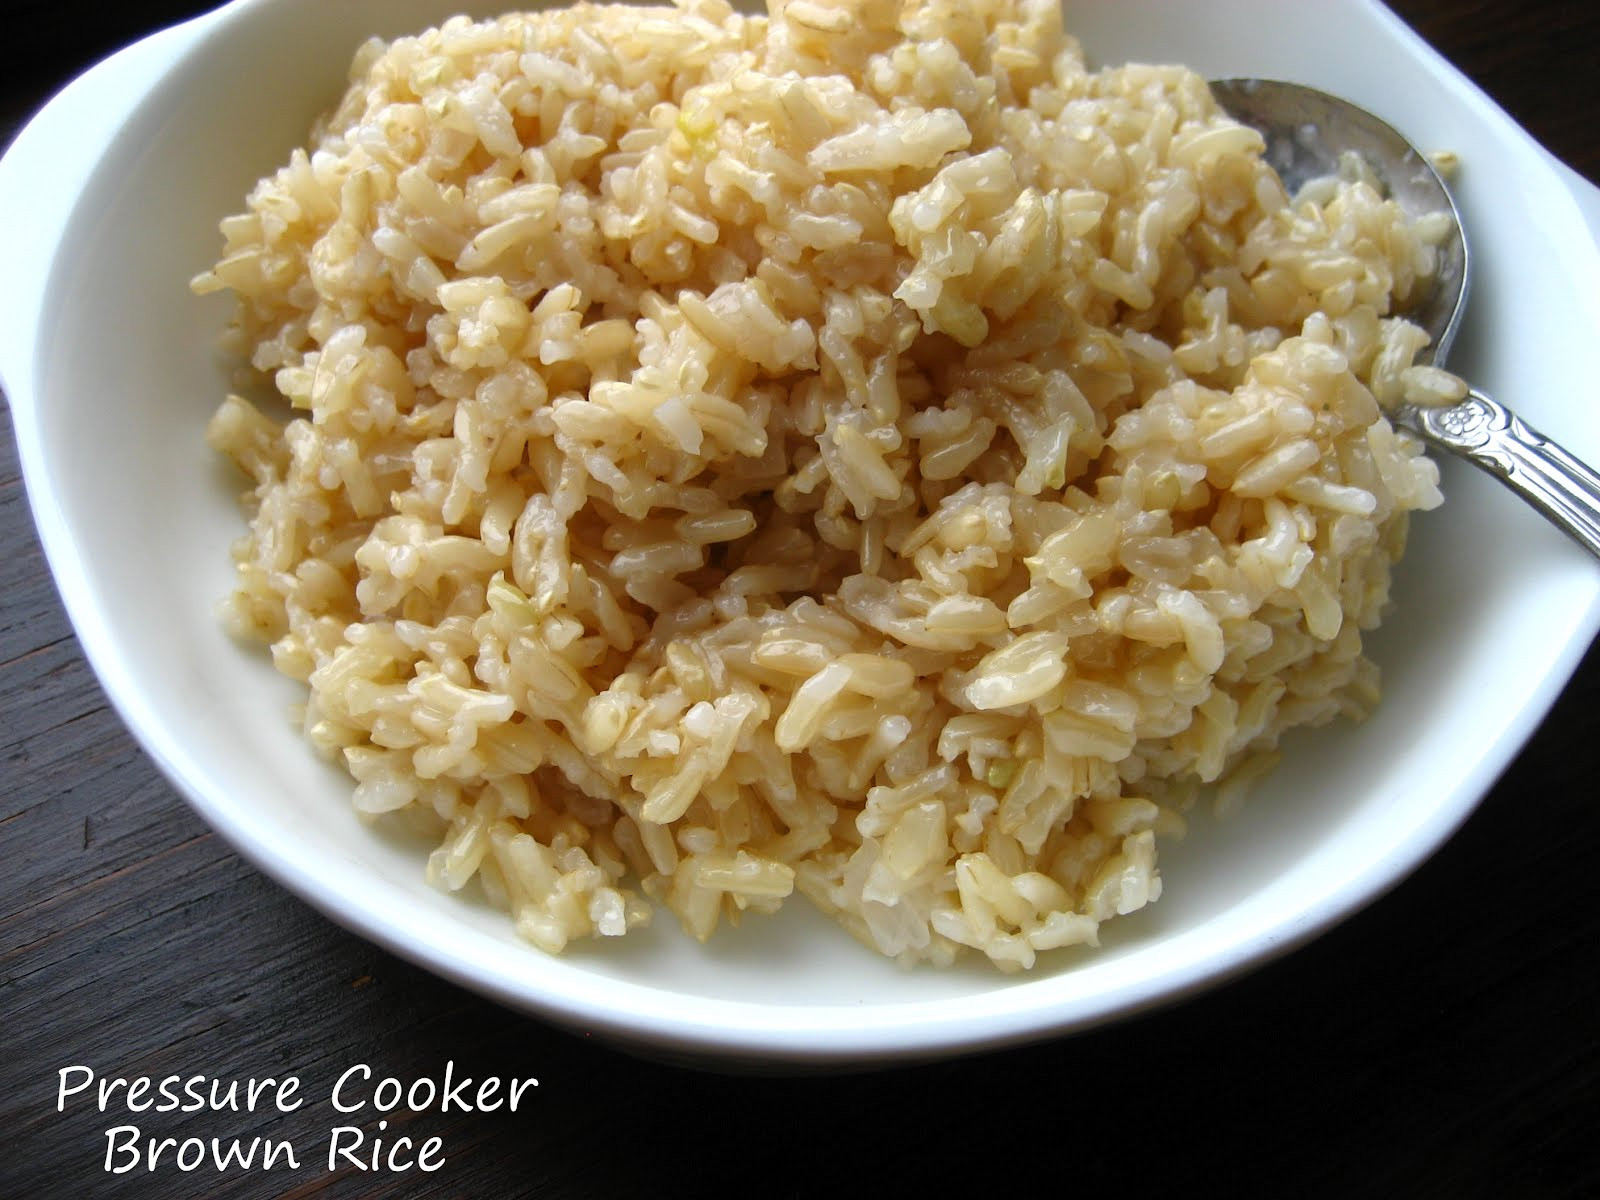 Brown Rice In Rice Cooker
 Home Cooking In Montana Pressure Cooker Brown Rice